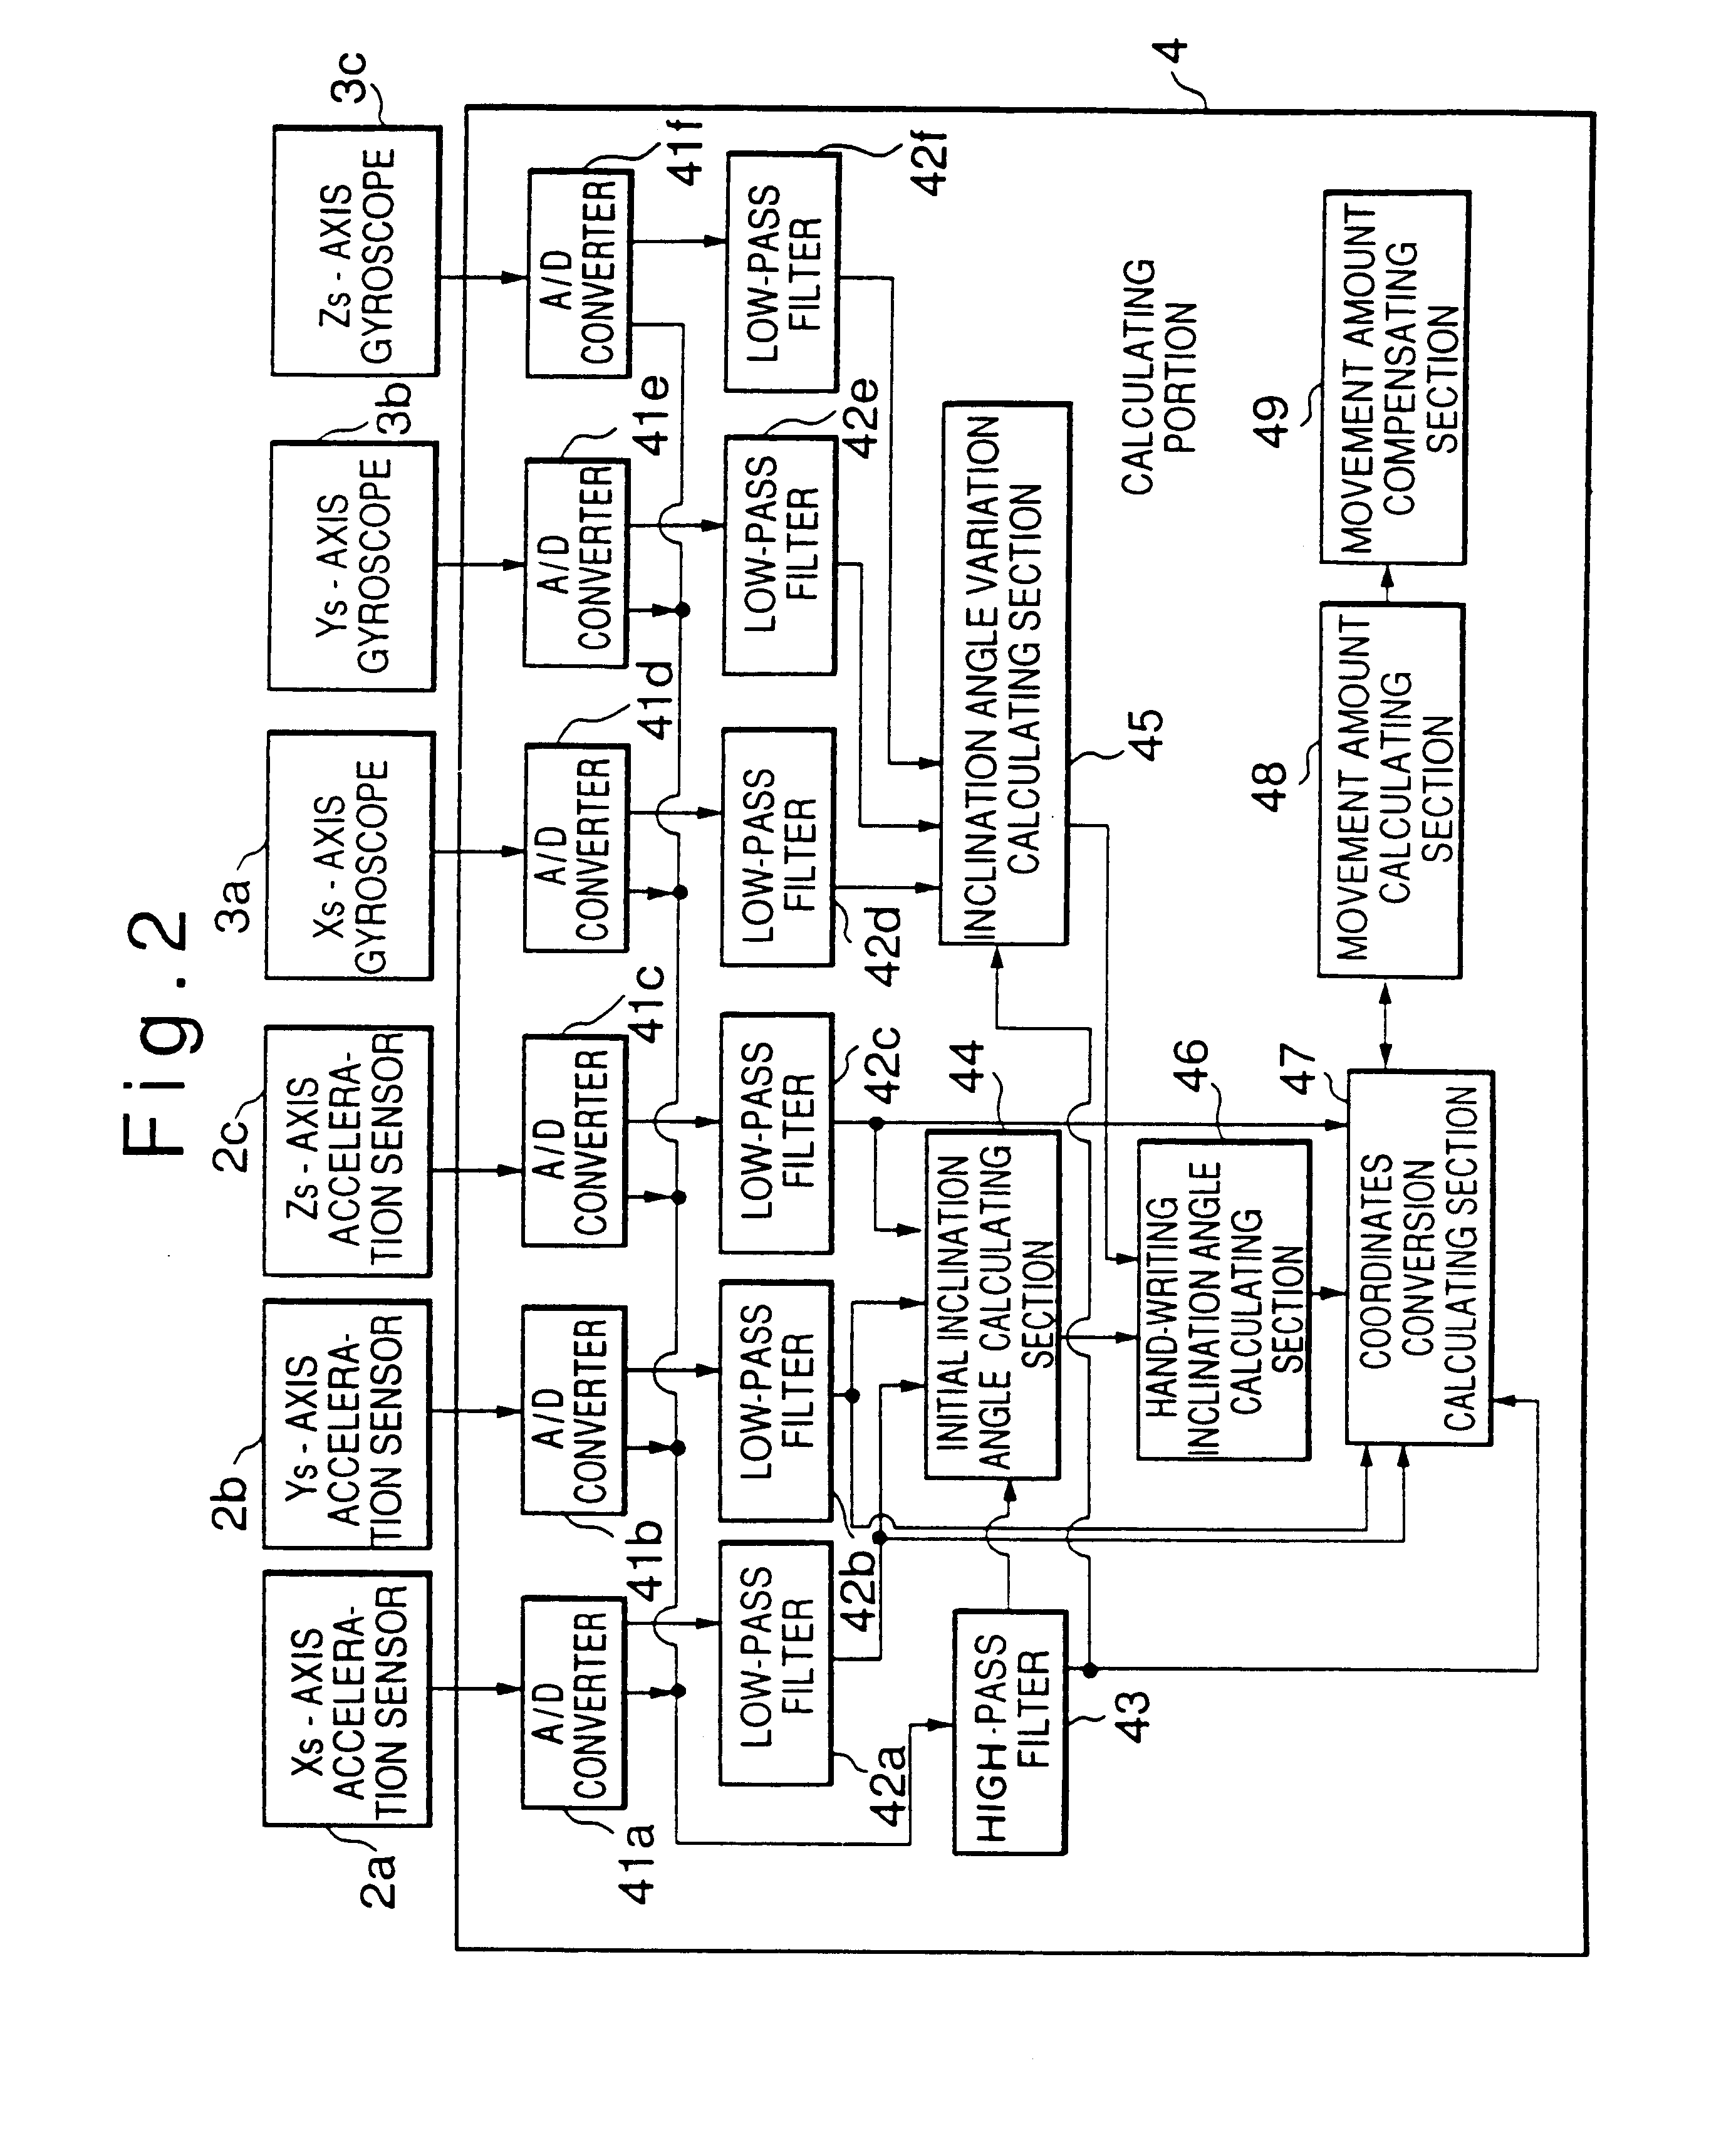 Pen-shaped handwriting input apparatus using accelerometers and gyroscopes and an associated operational device for determining pen movement